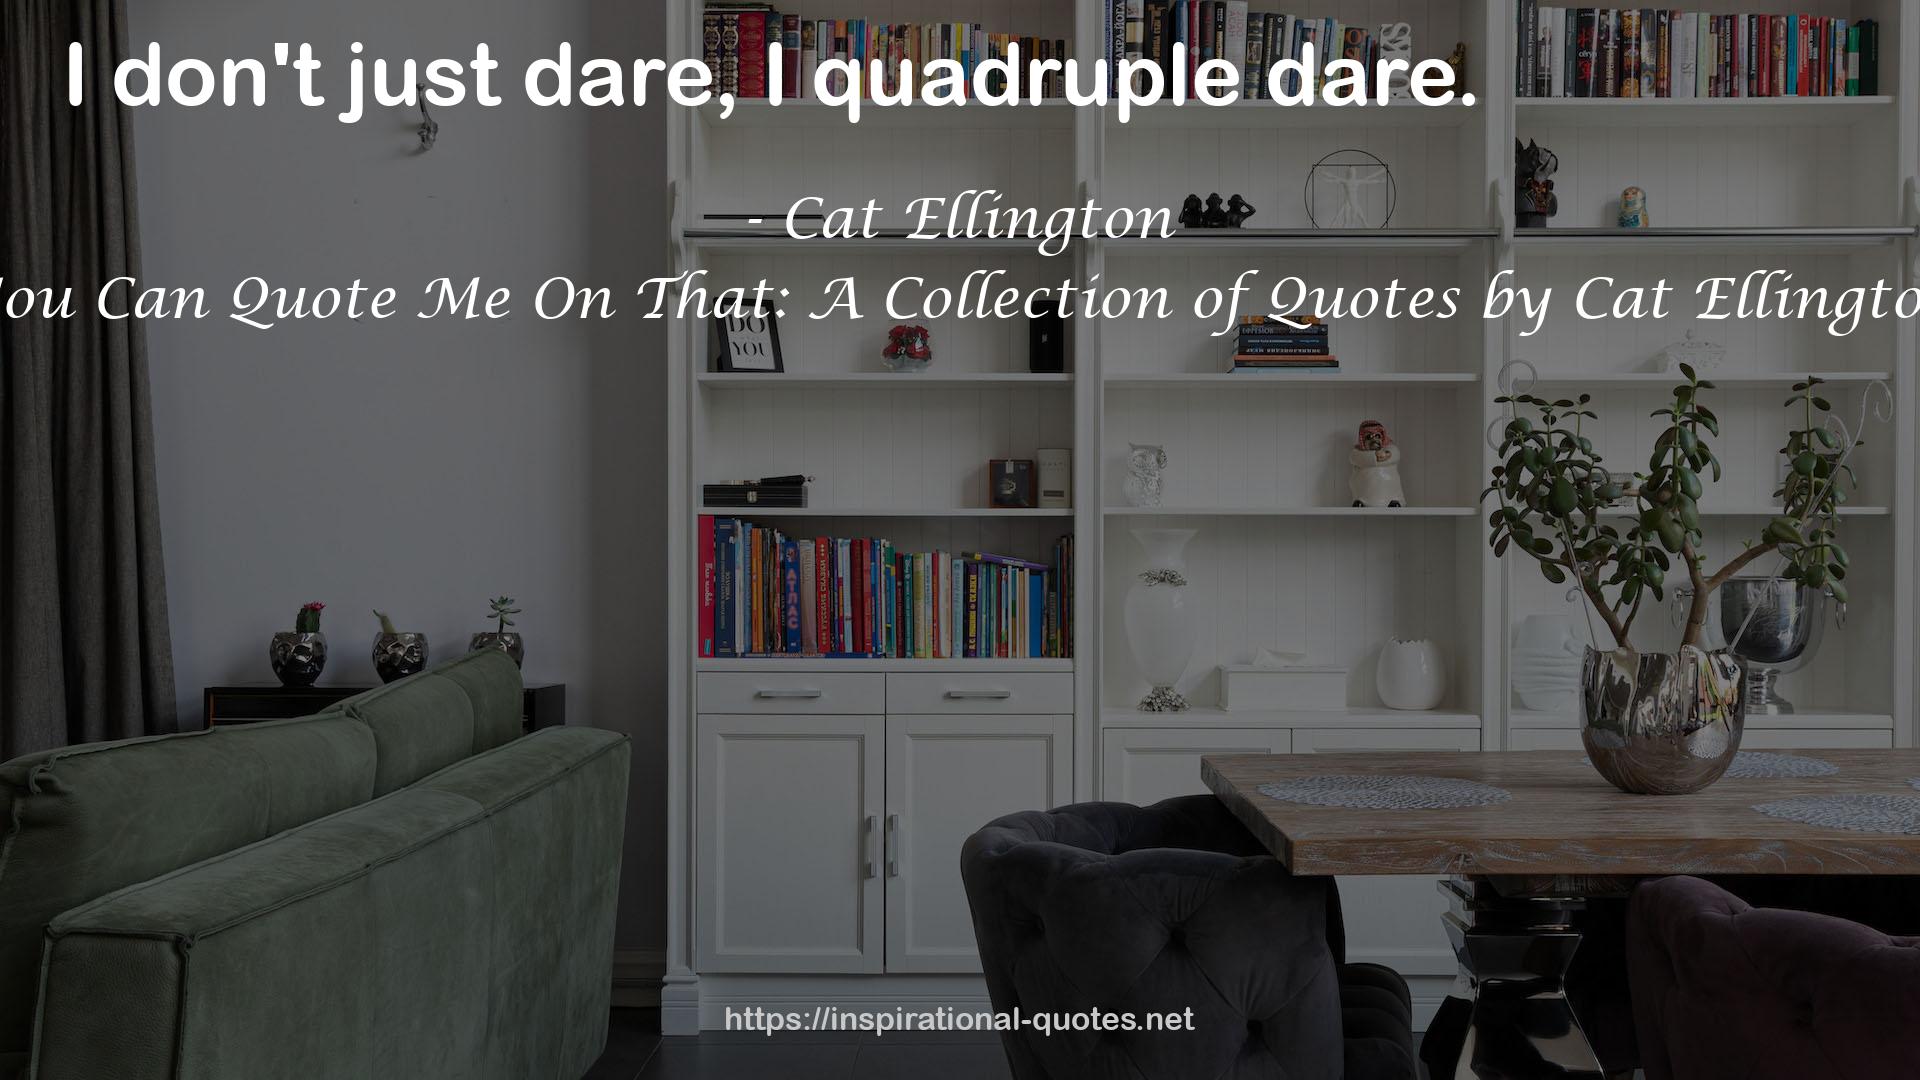 You Can Quote Me On That: A Collection of Quotes by Cat Ellington QUOTES